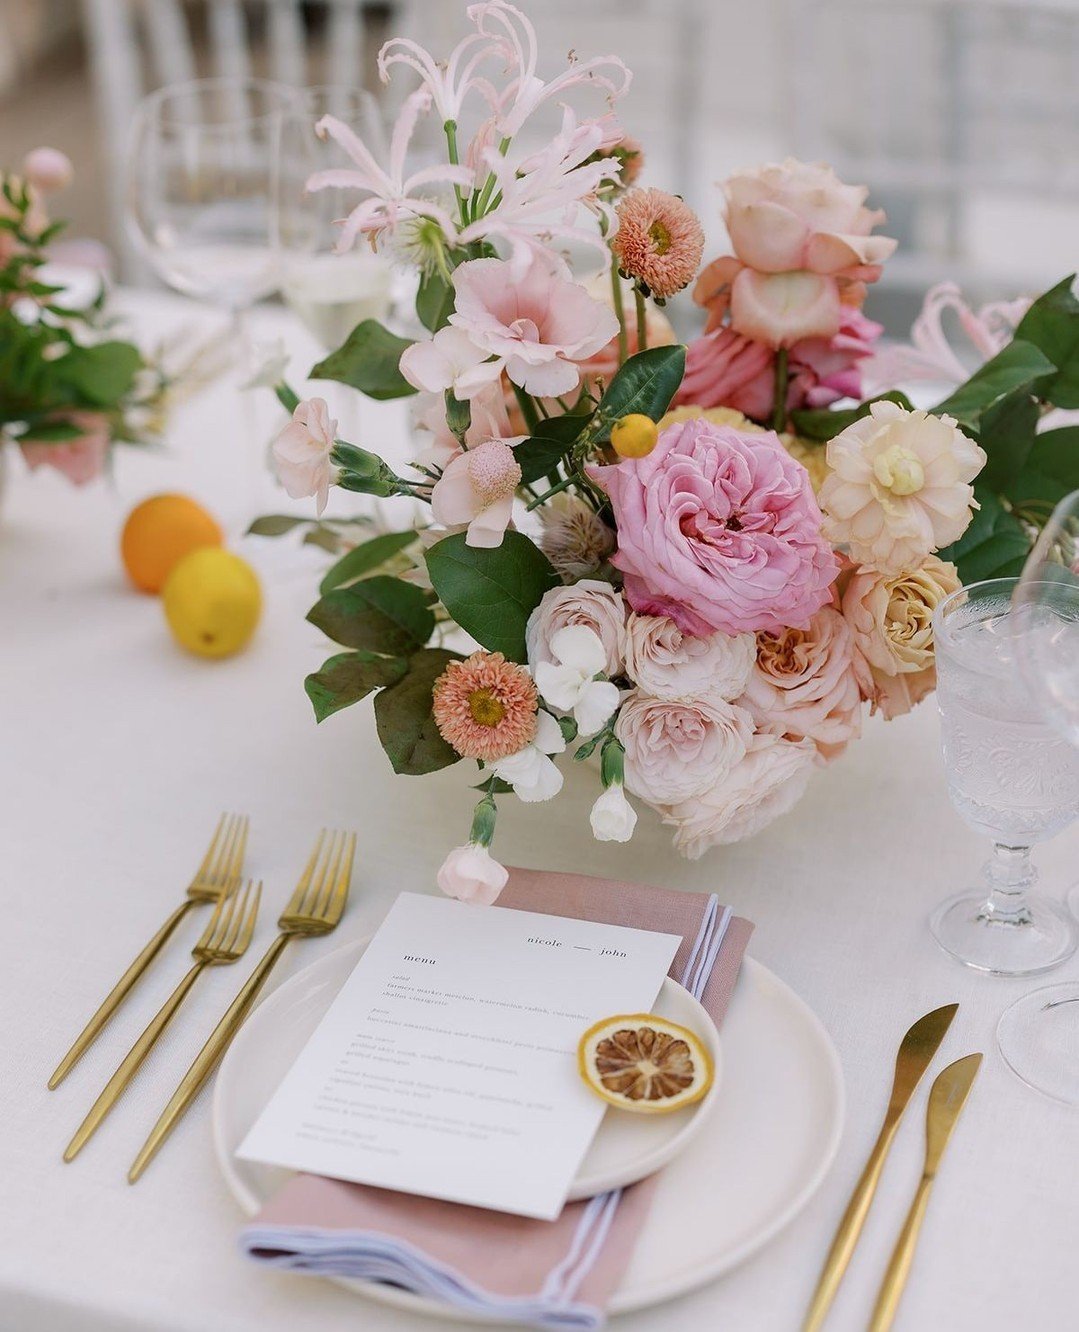 Flowers with a side of fruit might be my new favorite spring/summertime look.  N+J incorporated vibrant shades of pink, blush, yellow, coral and orange into their entire wedding design to create an Italian summer inspired garden party. ⁠
⁠
Venue @the